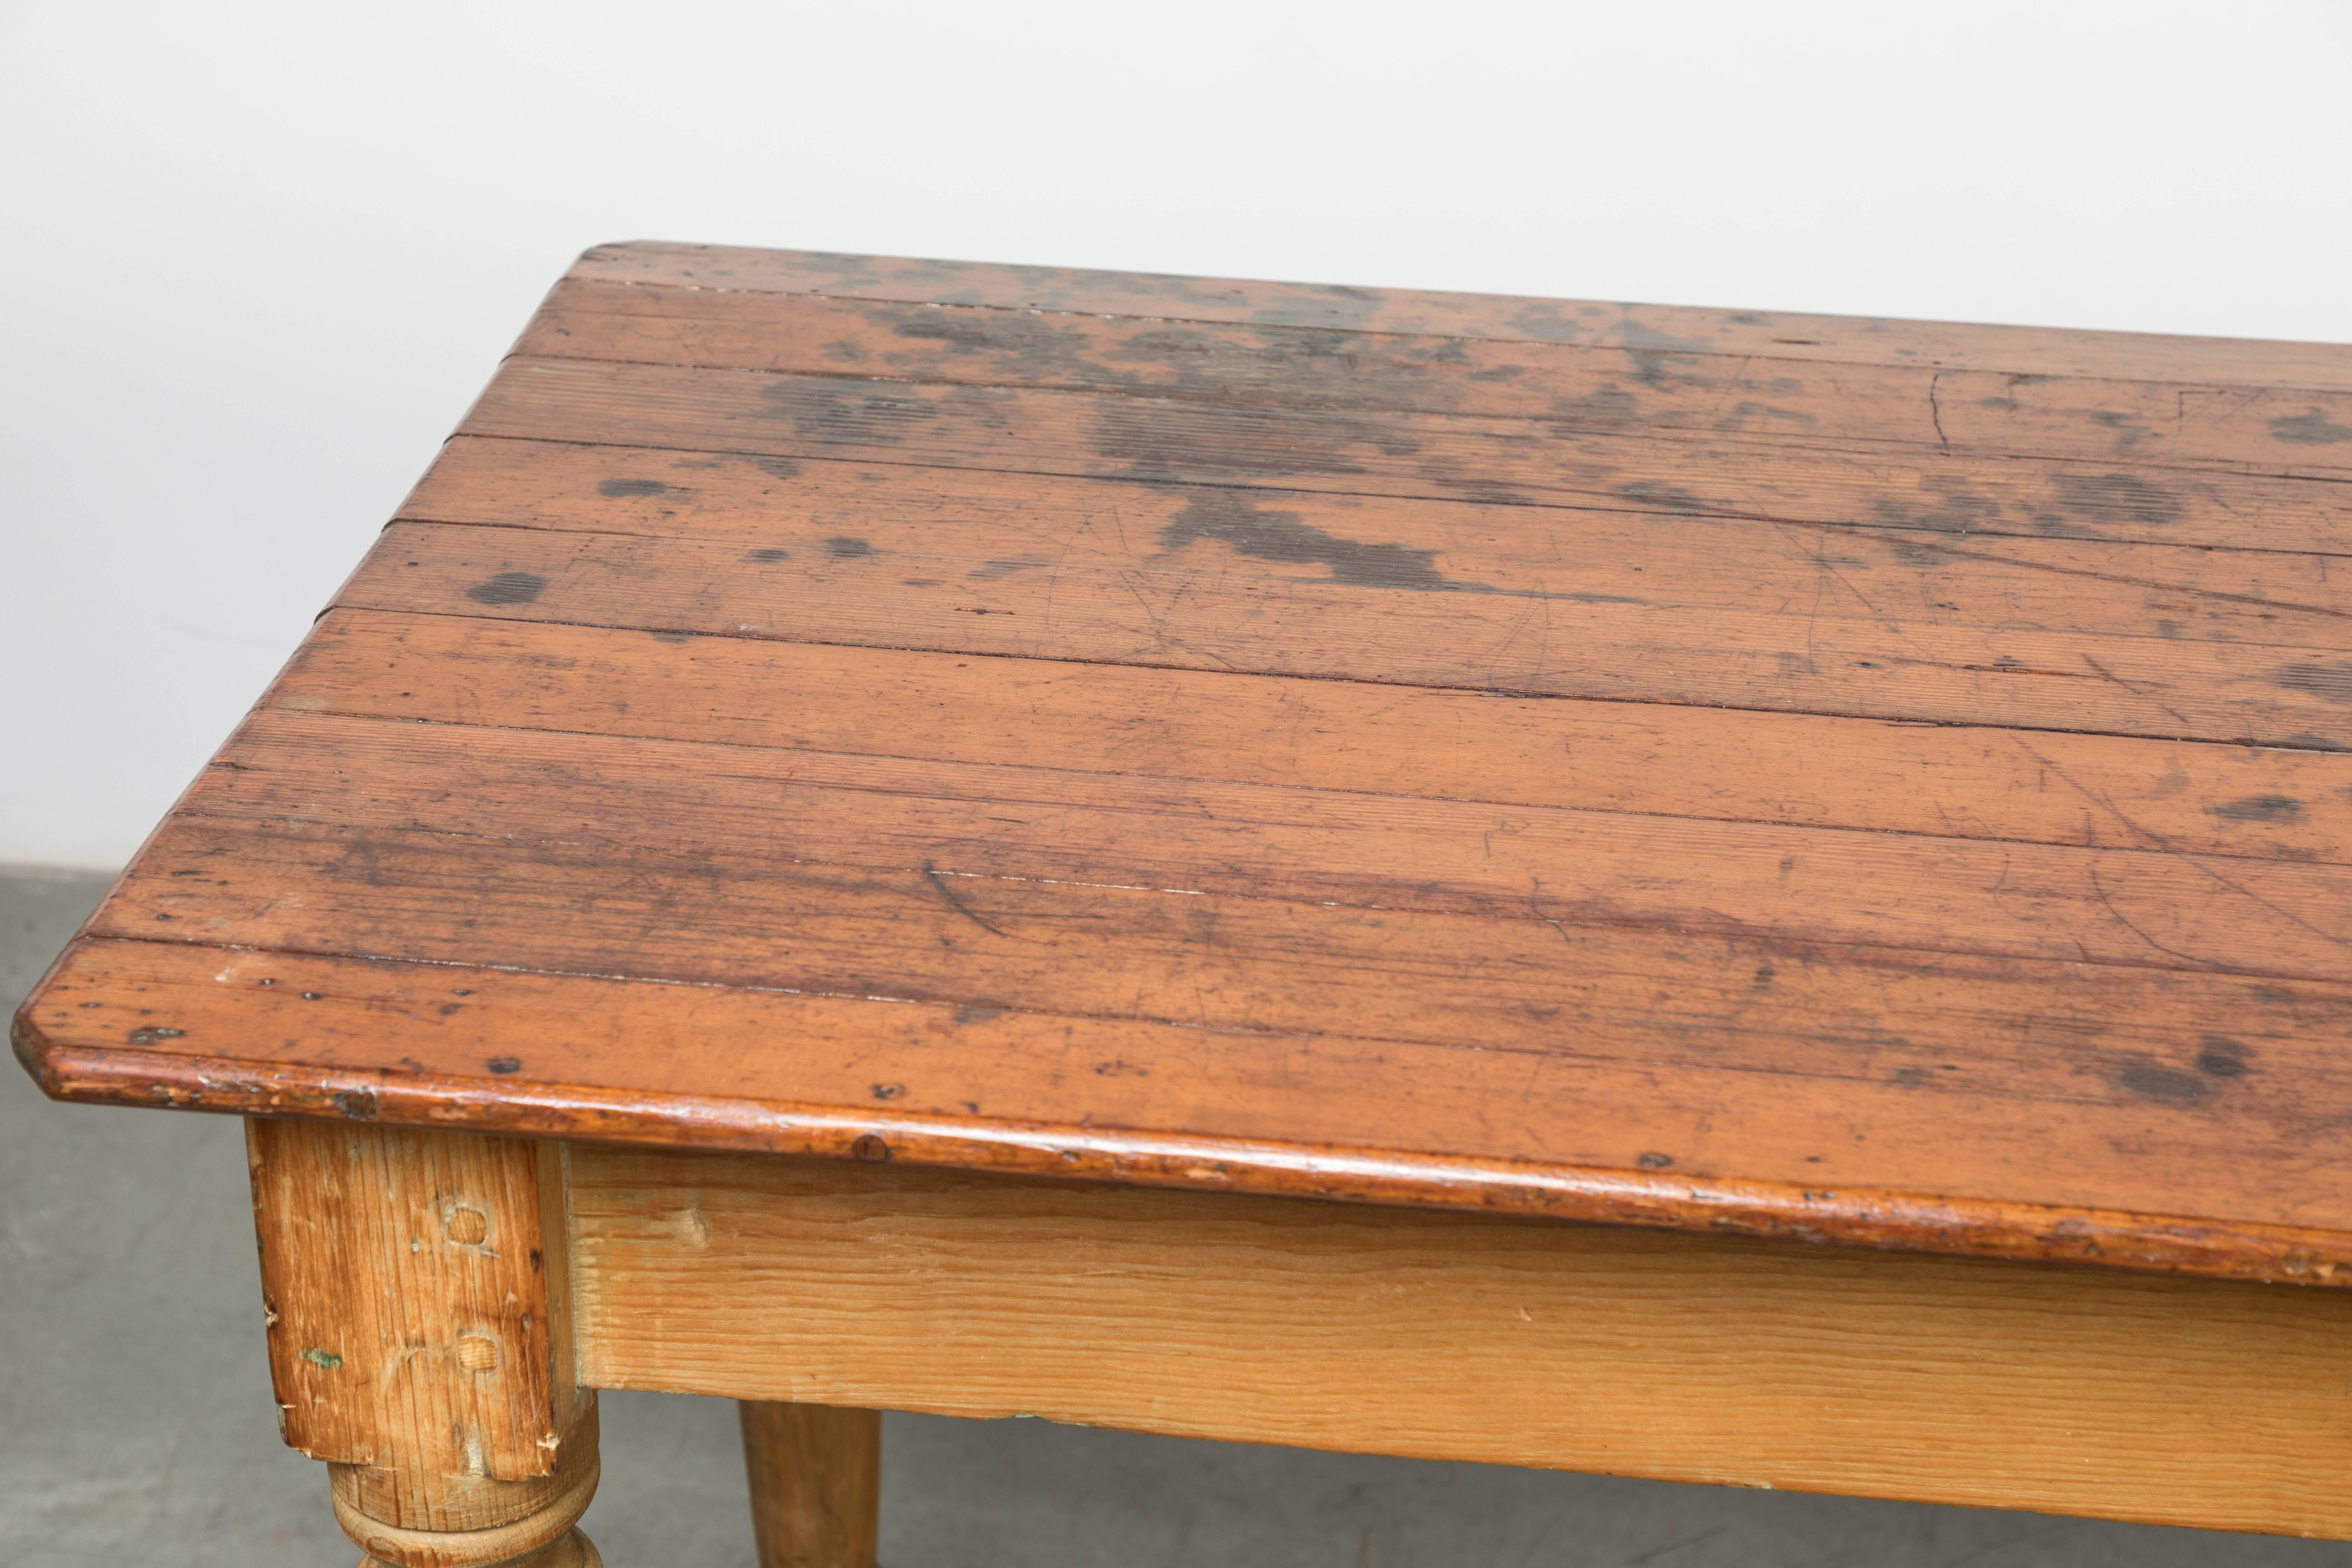 Carved Late 19th Century American General Store or Harvest Table